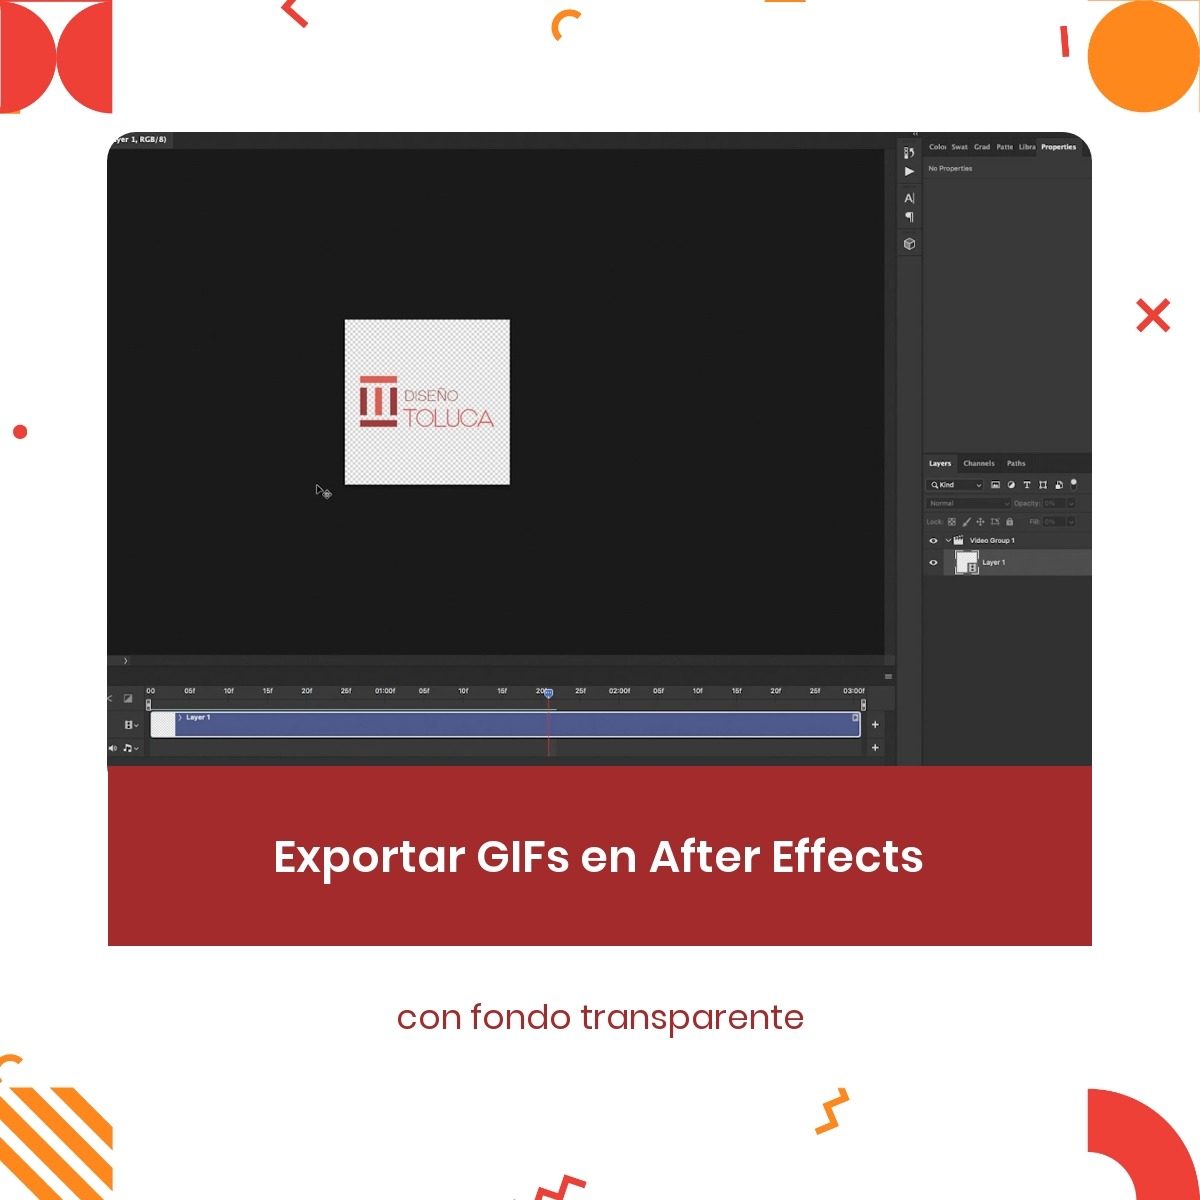 exportar-gif-after-effects